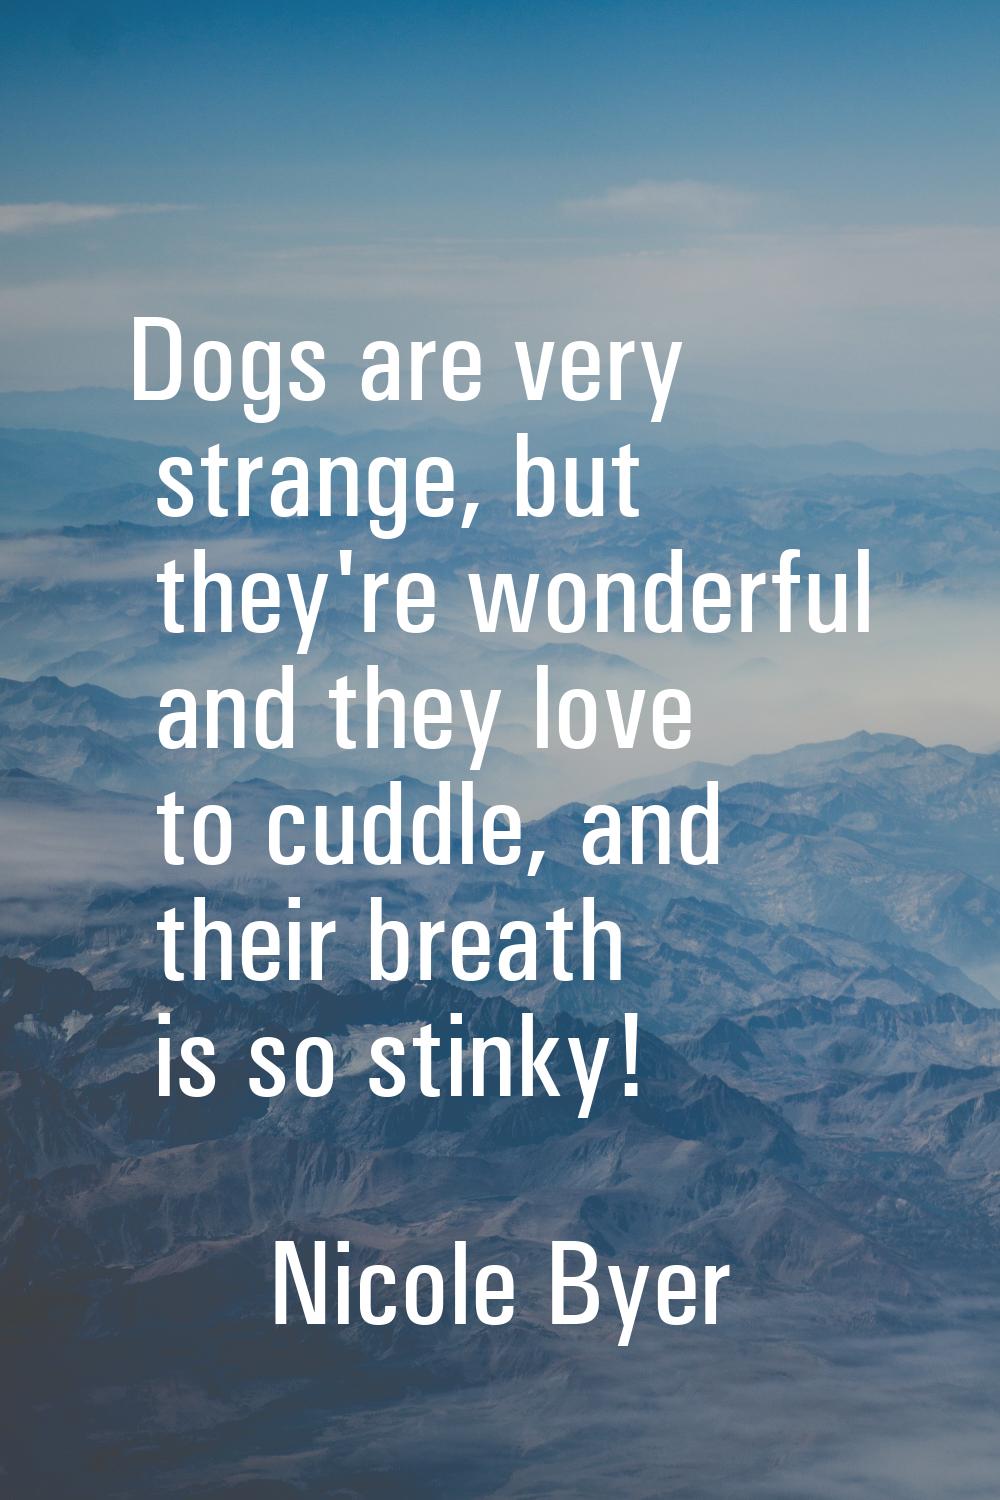 Dogs are very strange, but they're wonderful and they love to cuddle, and their breath is so stinky